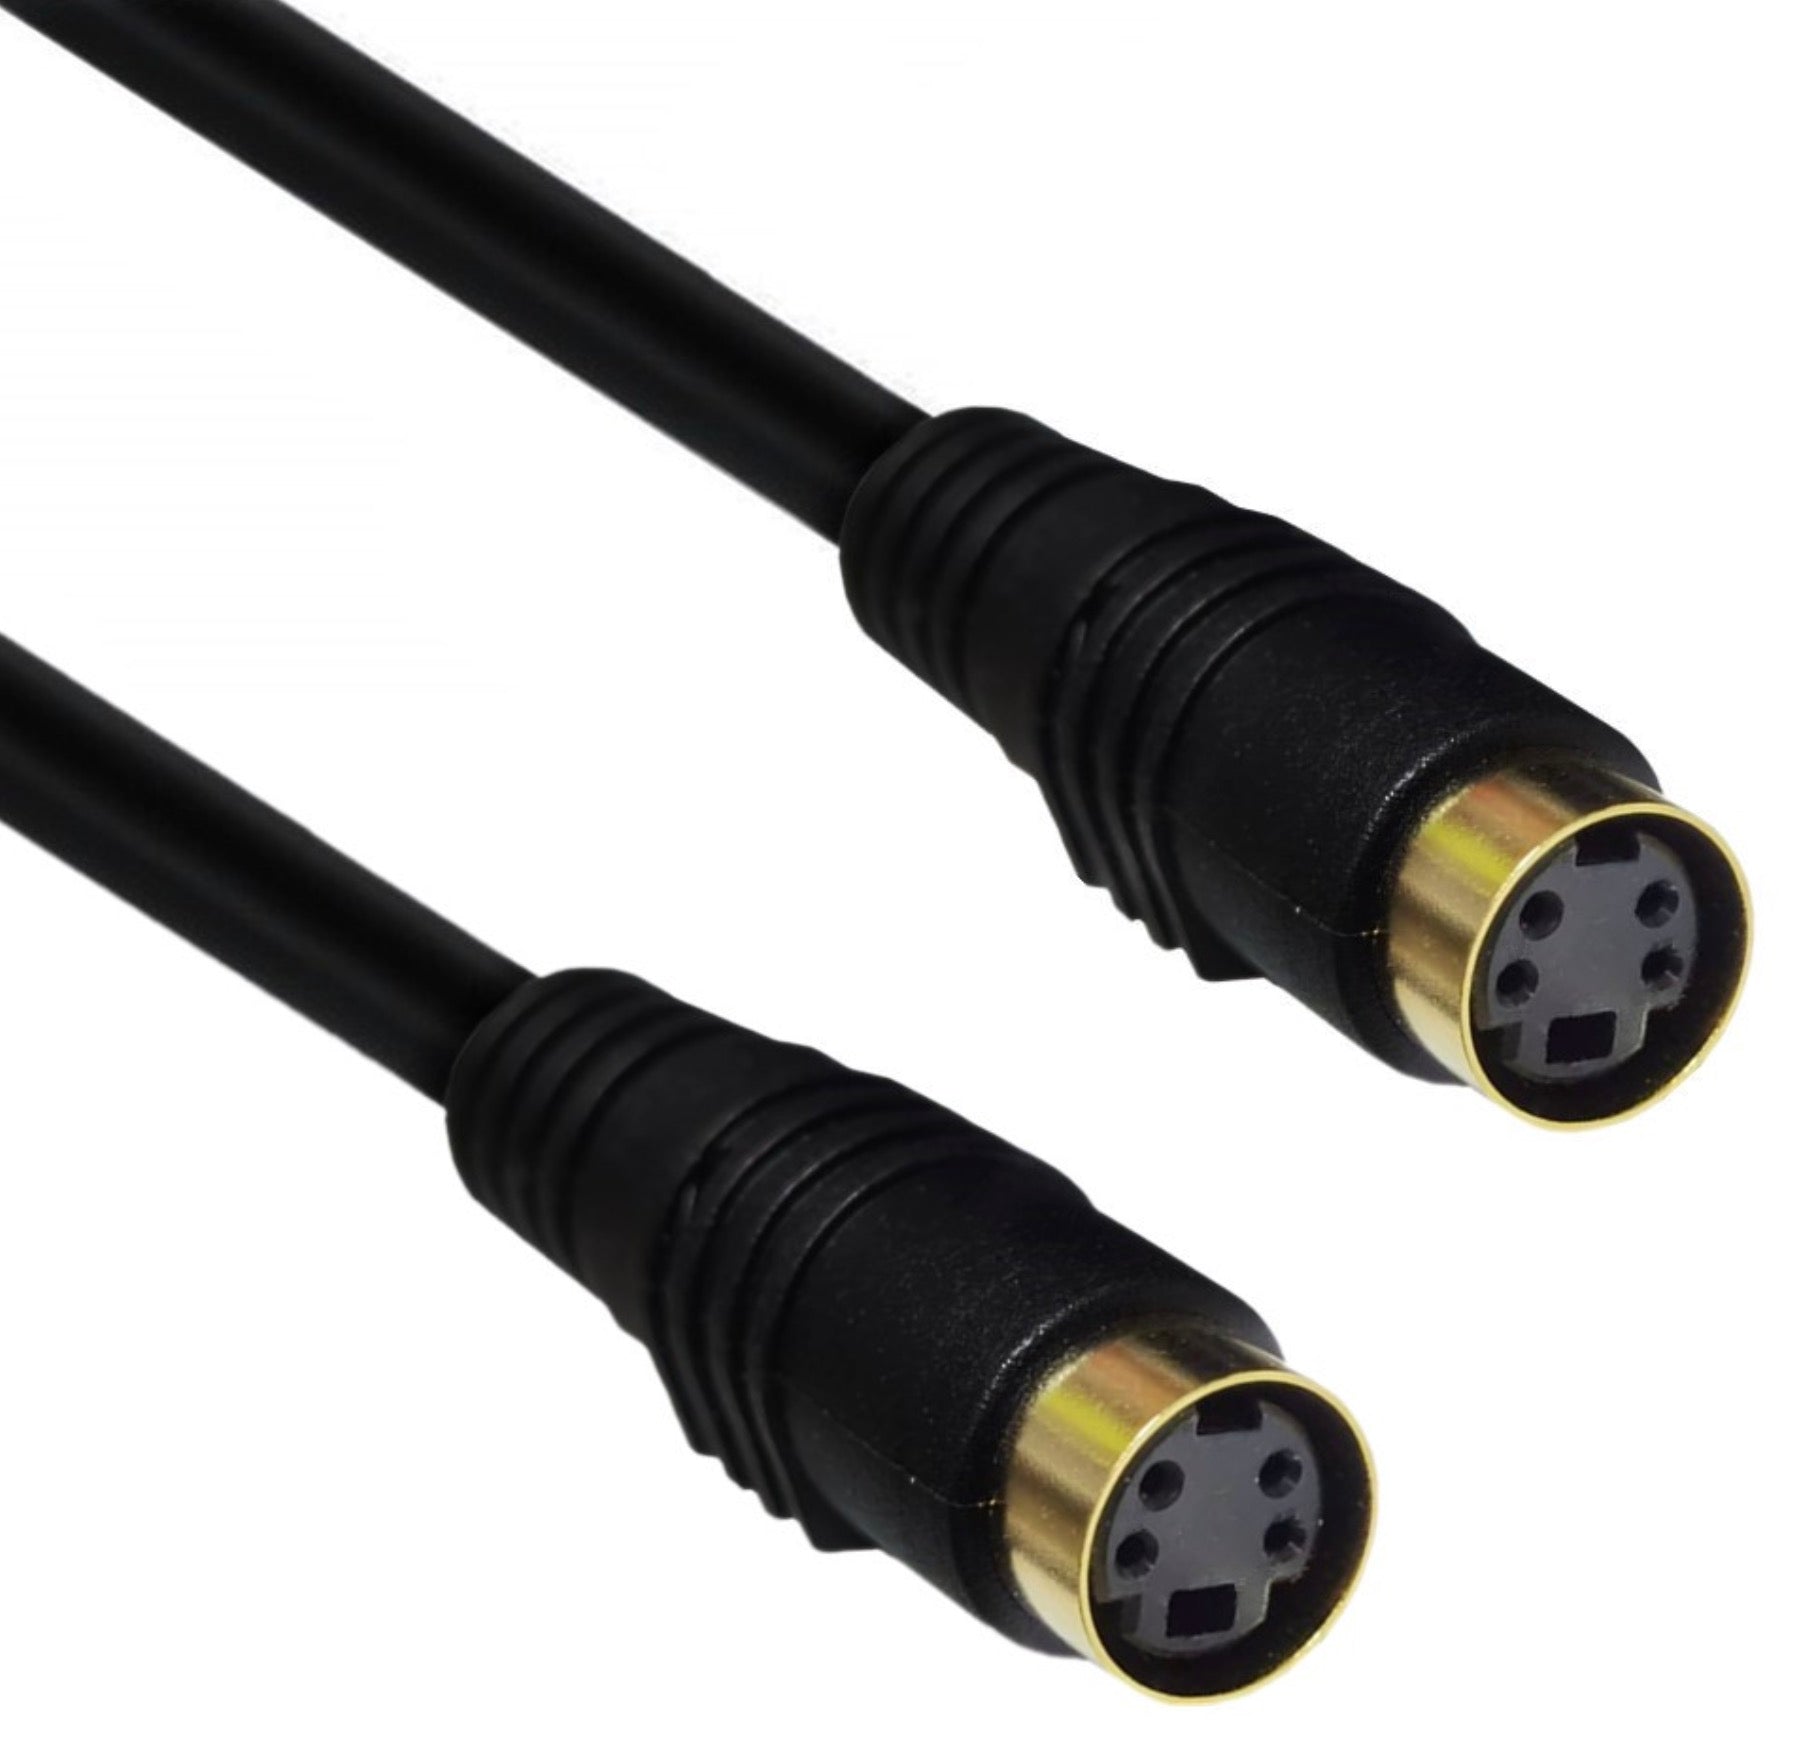 S-Video 4 Terminal Female to Female Connector Stereo Audio Video Cable 0.15m